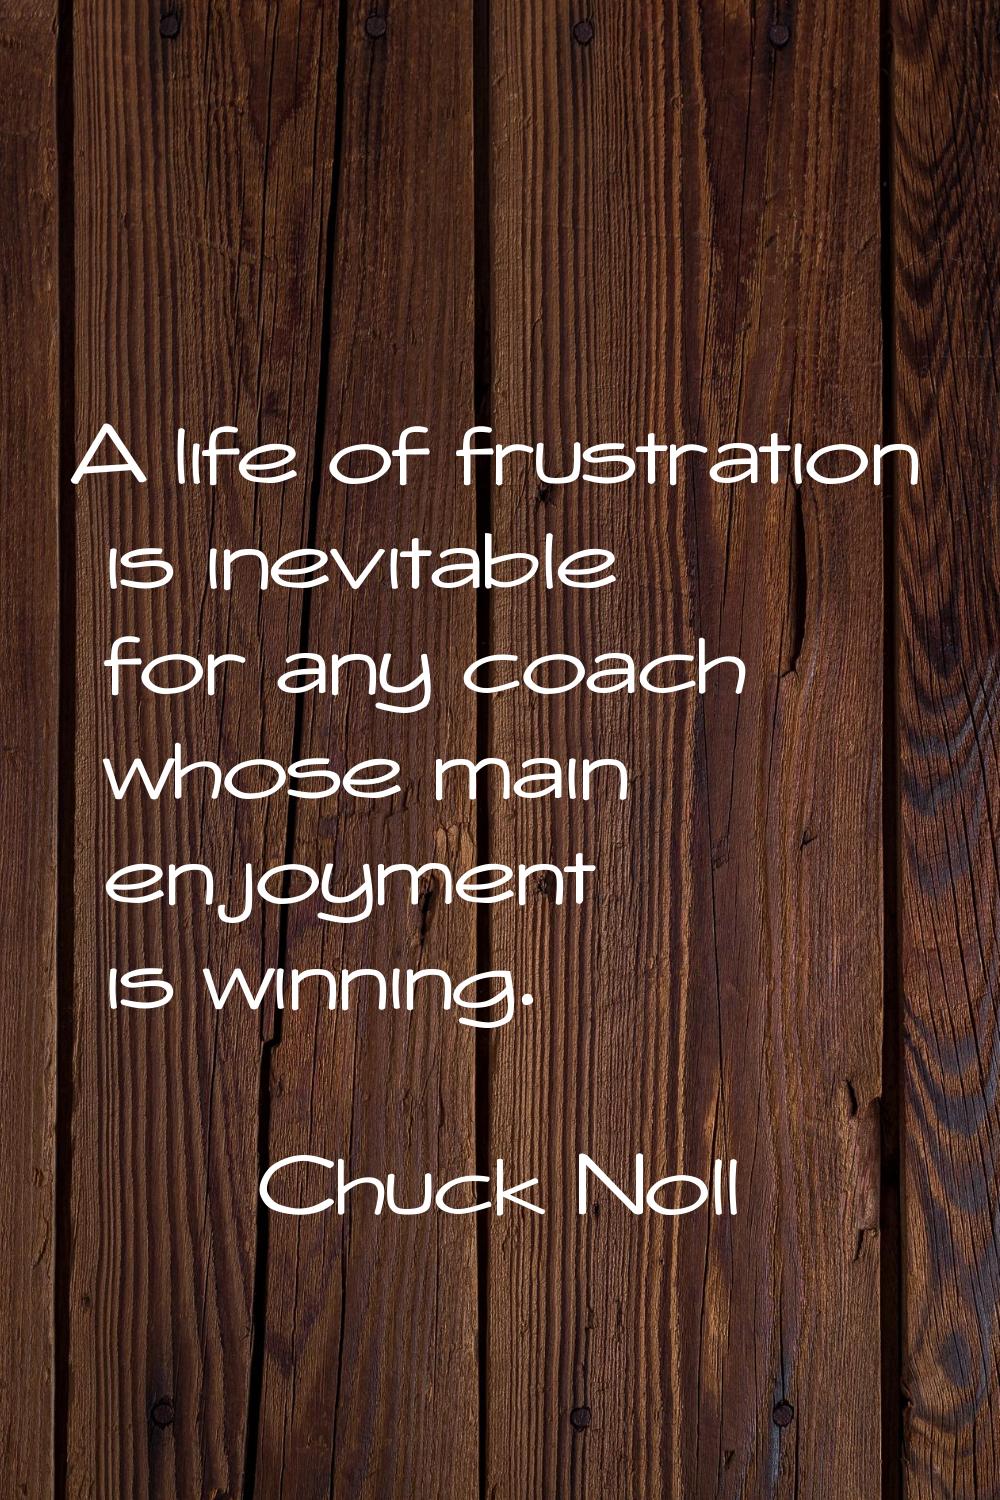 A life of frustration is inevitable for any coach whose main enjoyment is winning.